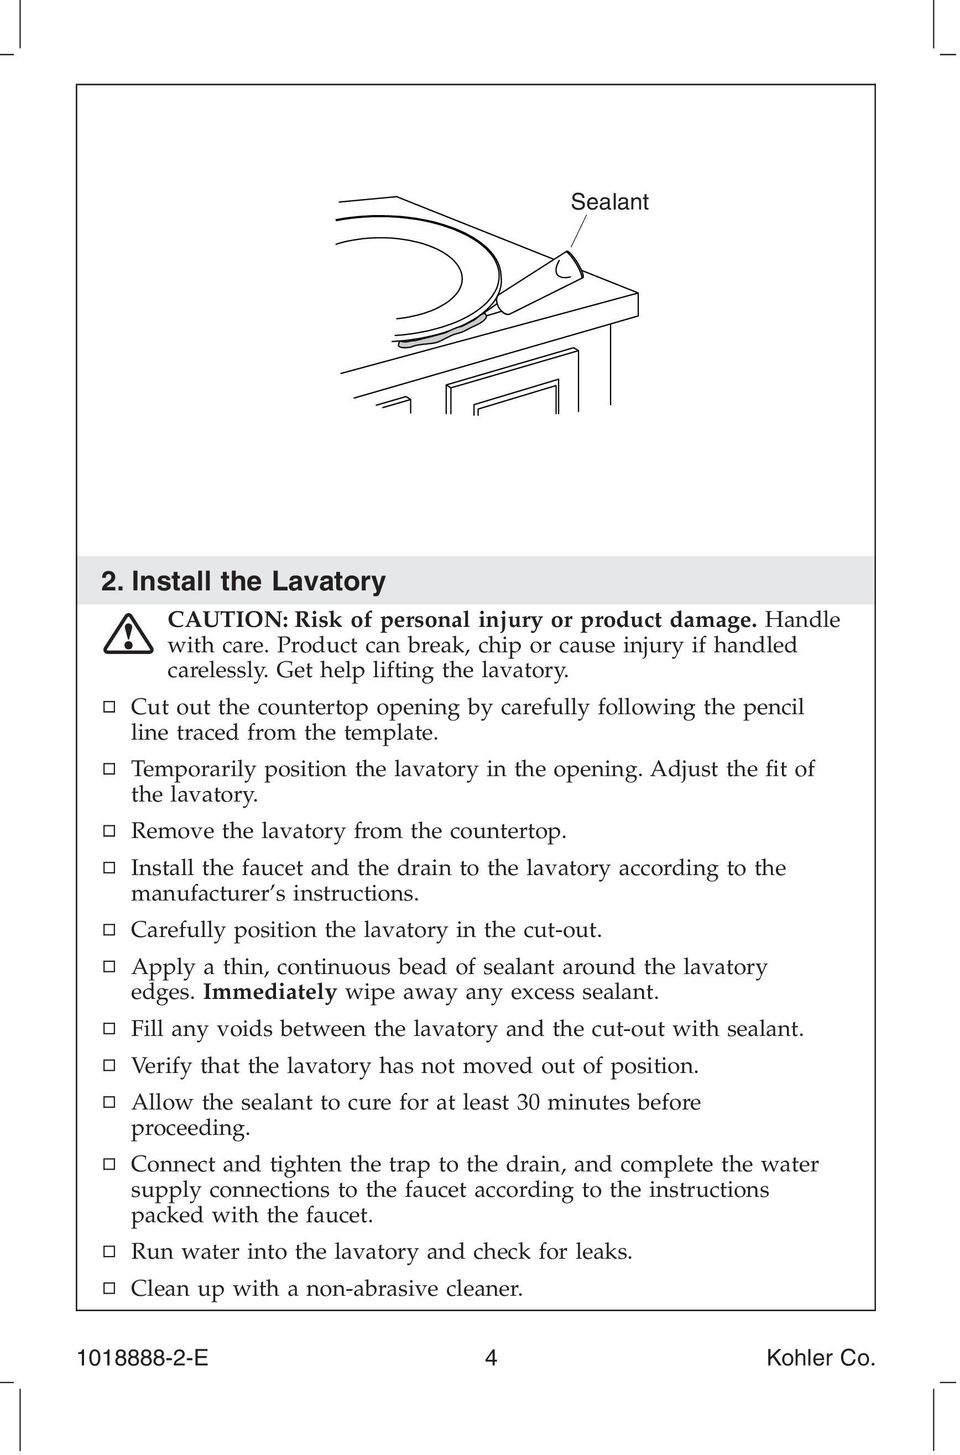 Remove the lavatory from the countertop. Install the faucet and the drain to the lavatory according to the manufacturer s instructions. Carefully position the lavatory in the cut-out.